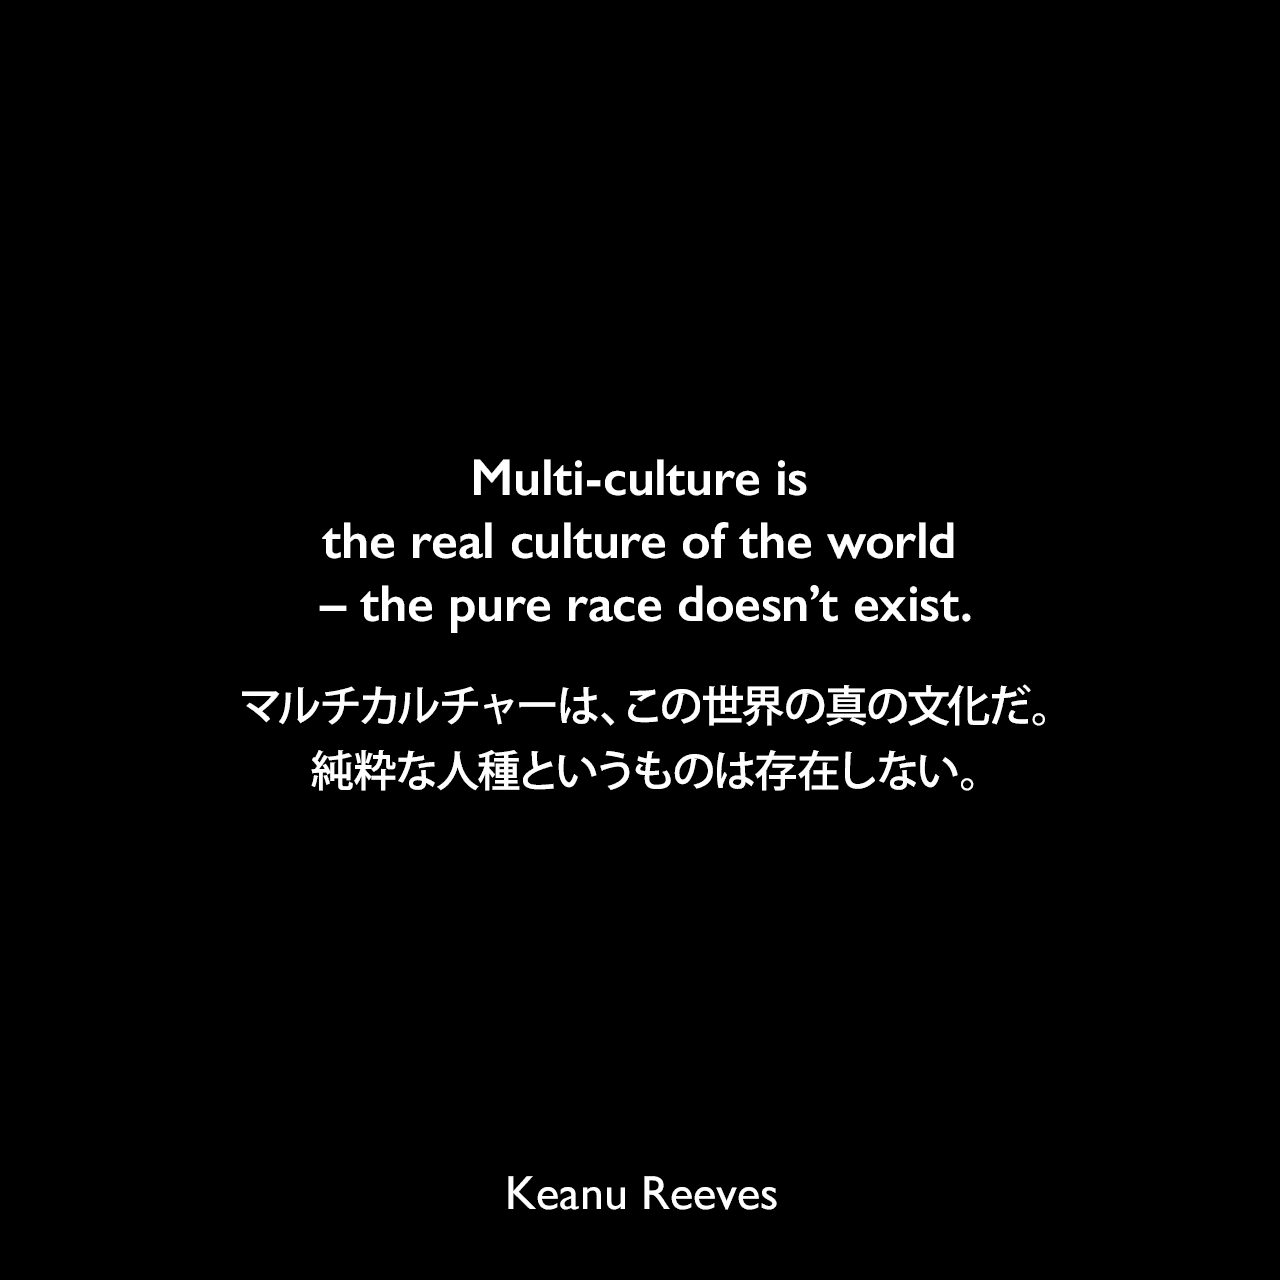 Multi-culture is the real culture of the world – the pure race doesn’t exist.マルチカルチャーは、この世界の真の文化だ。純粋な人種というものは存在しない。Keanu Reeves